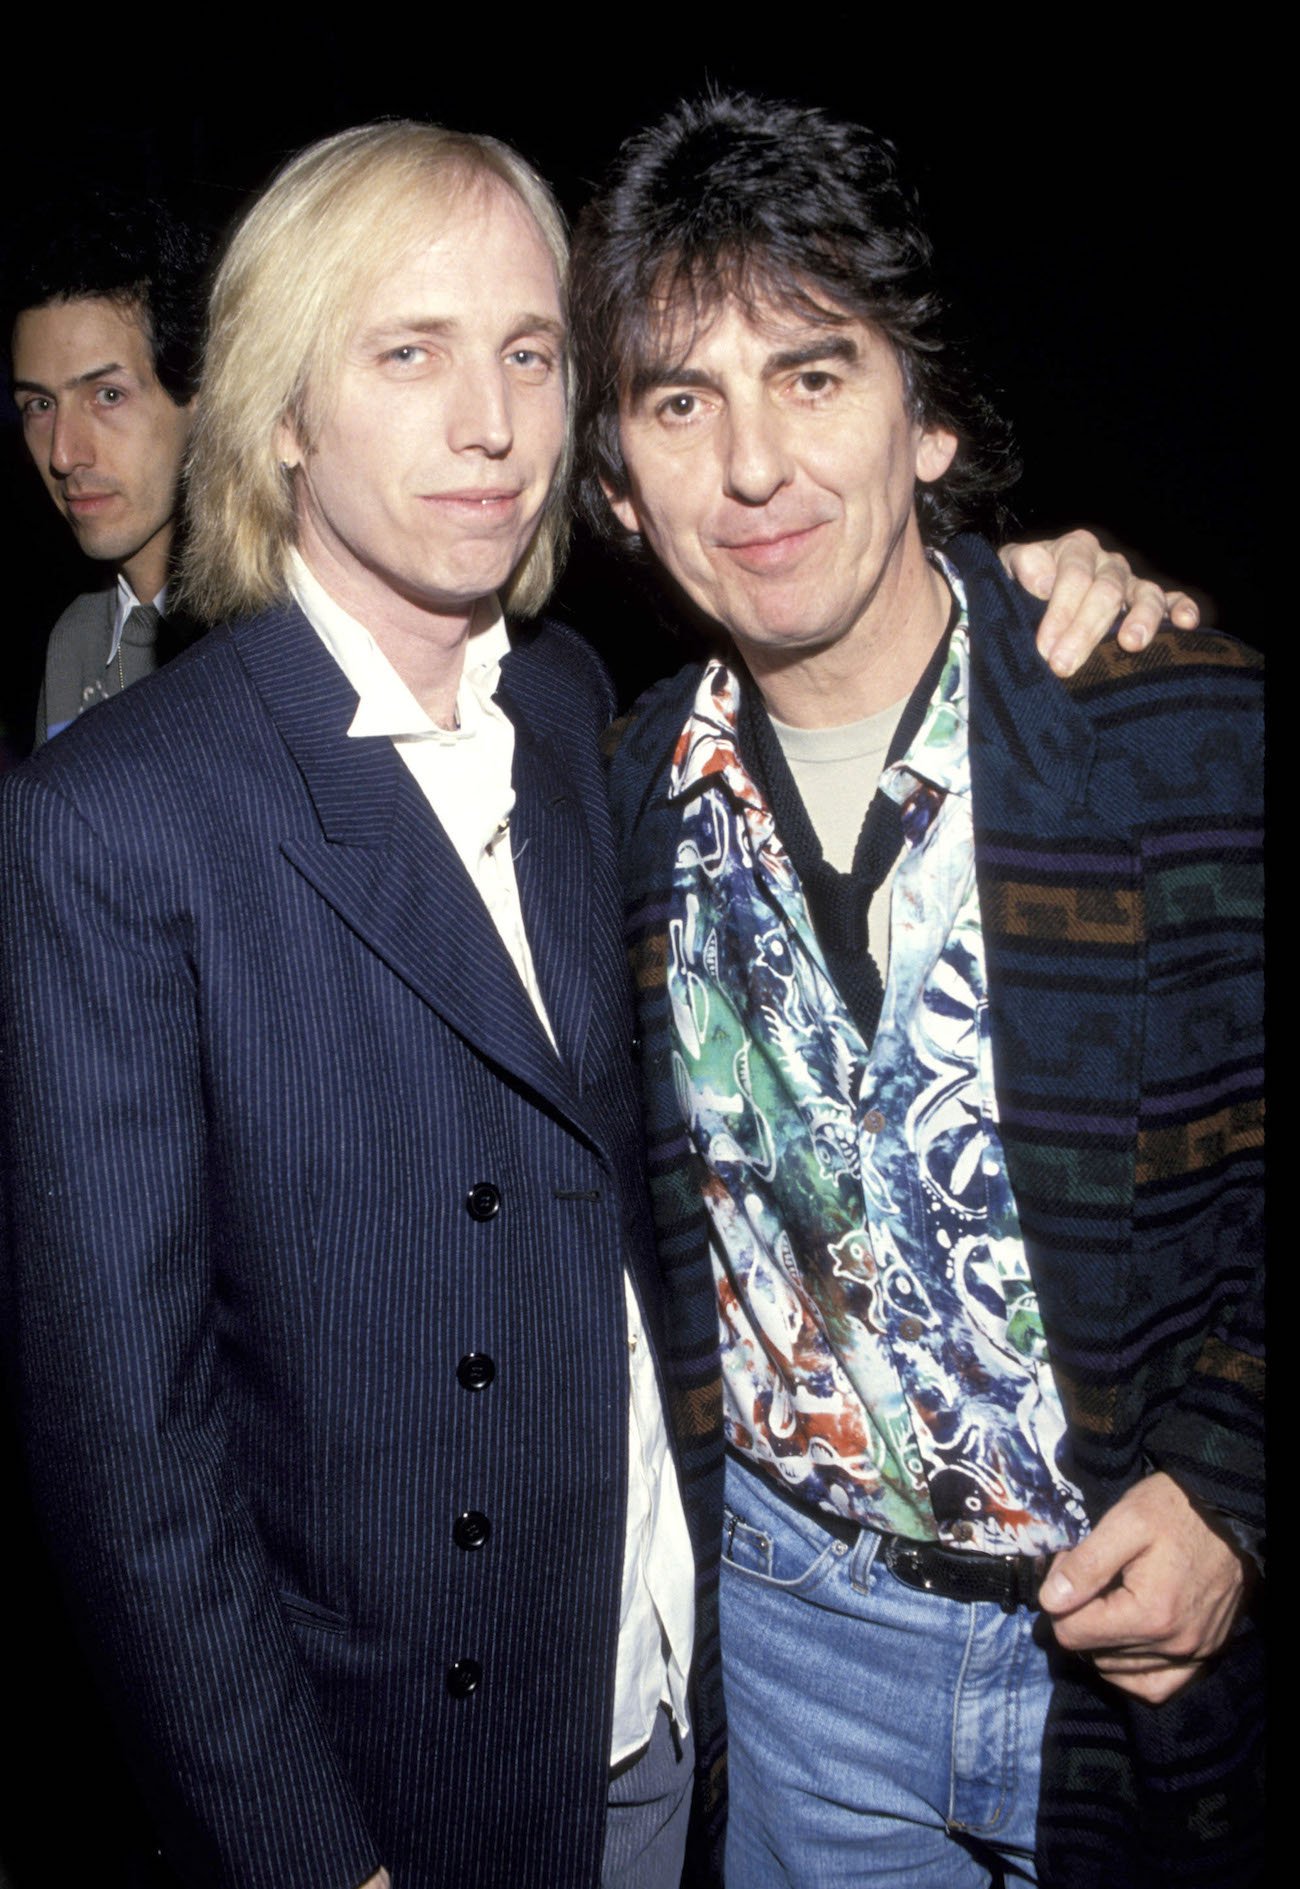 George Harrison and Tom Petty at the 1992 Billboard Music Awards.